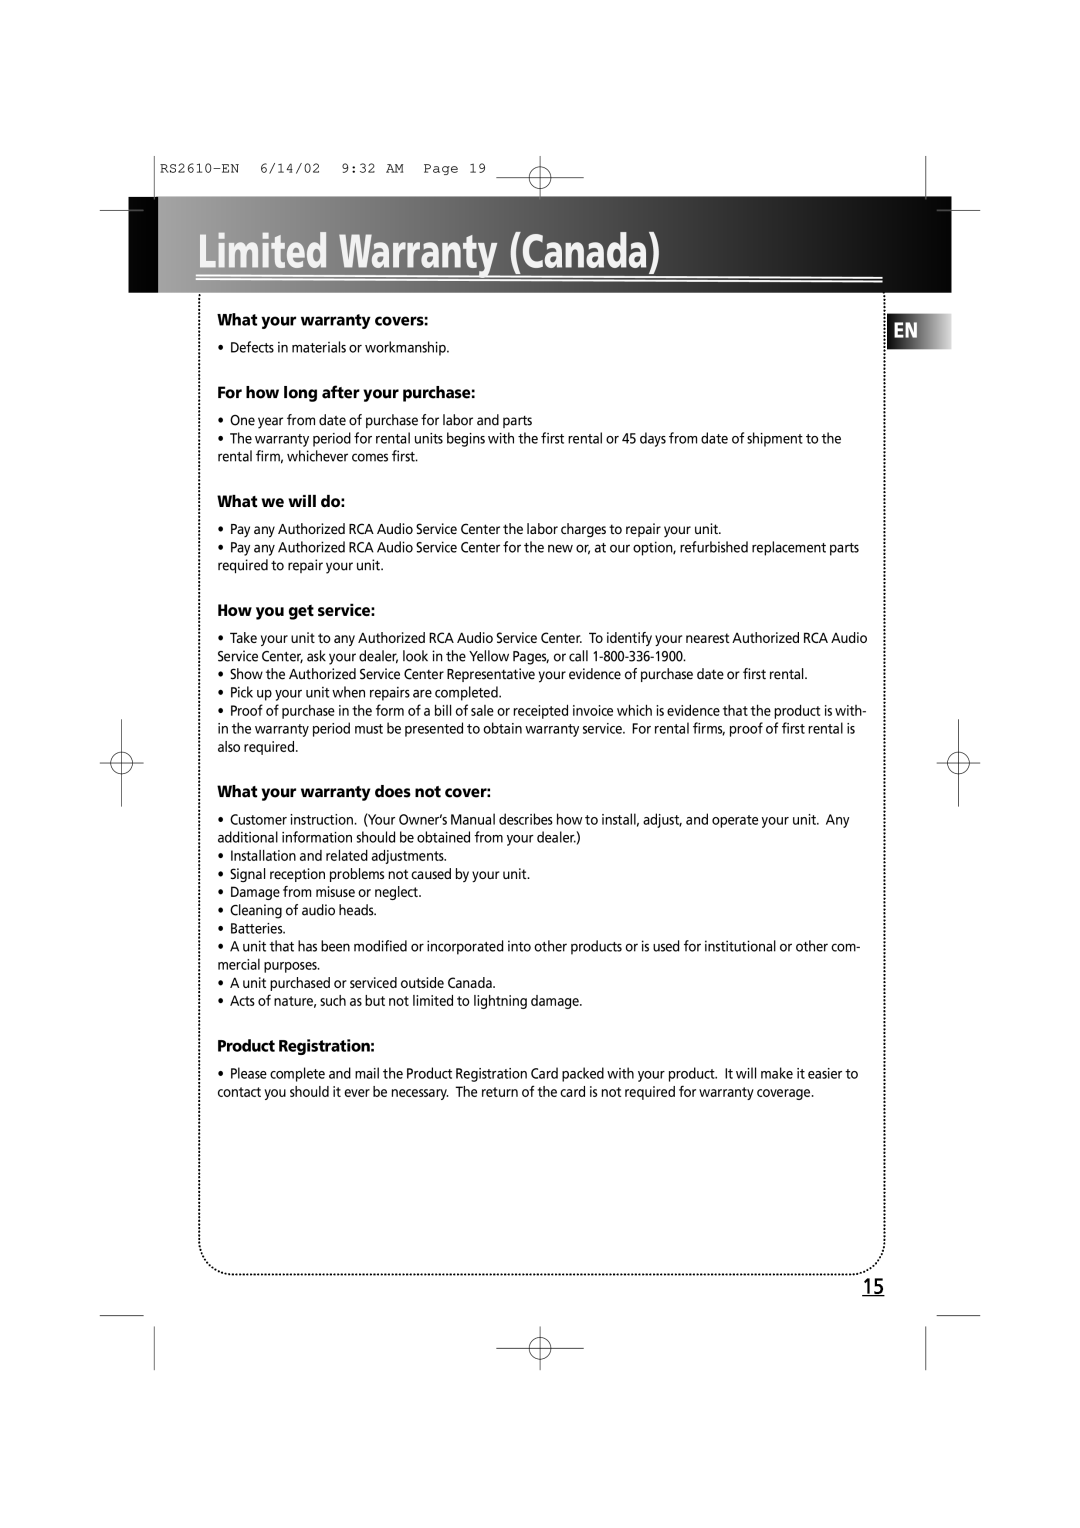 RCA fm radio tuner Limited Warranty Canada, What your warranty covers, For how long after your purchase, What we will do 